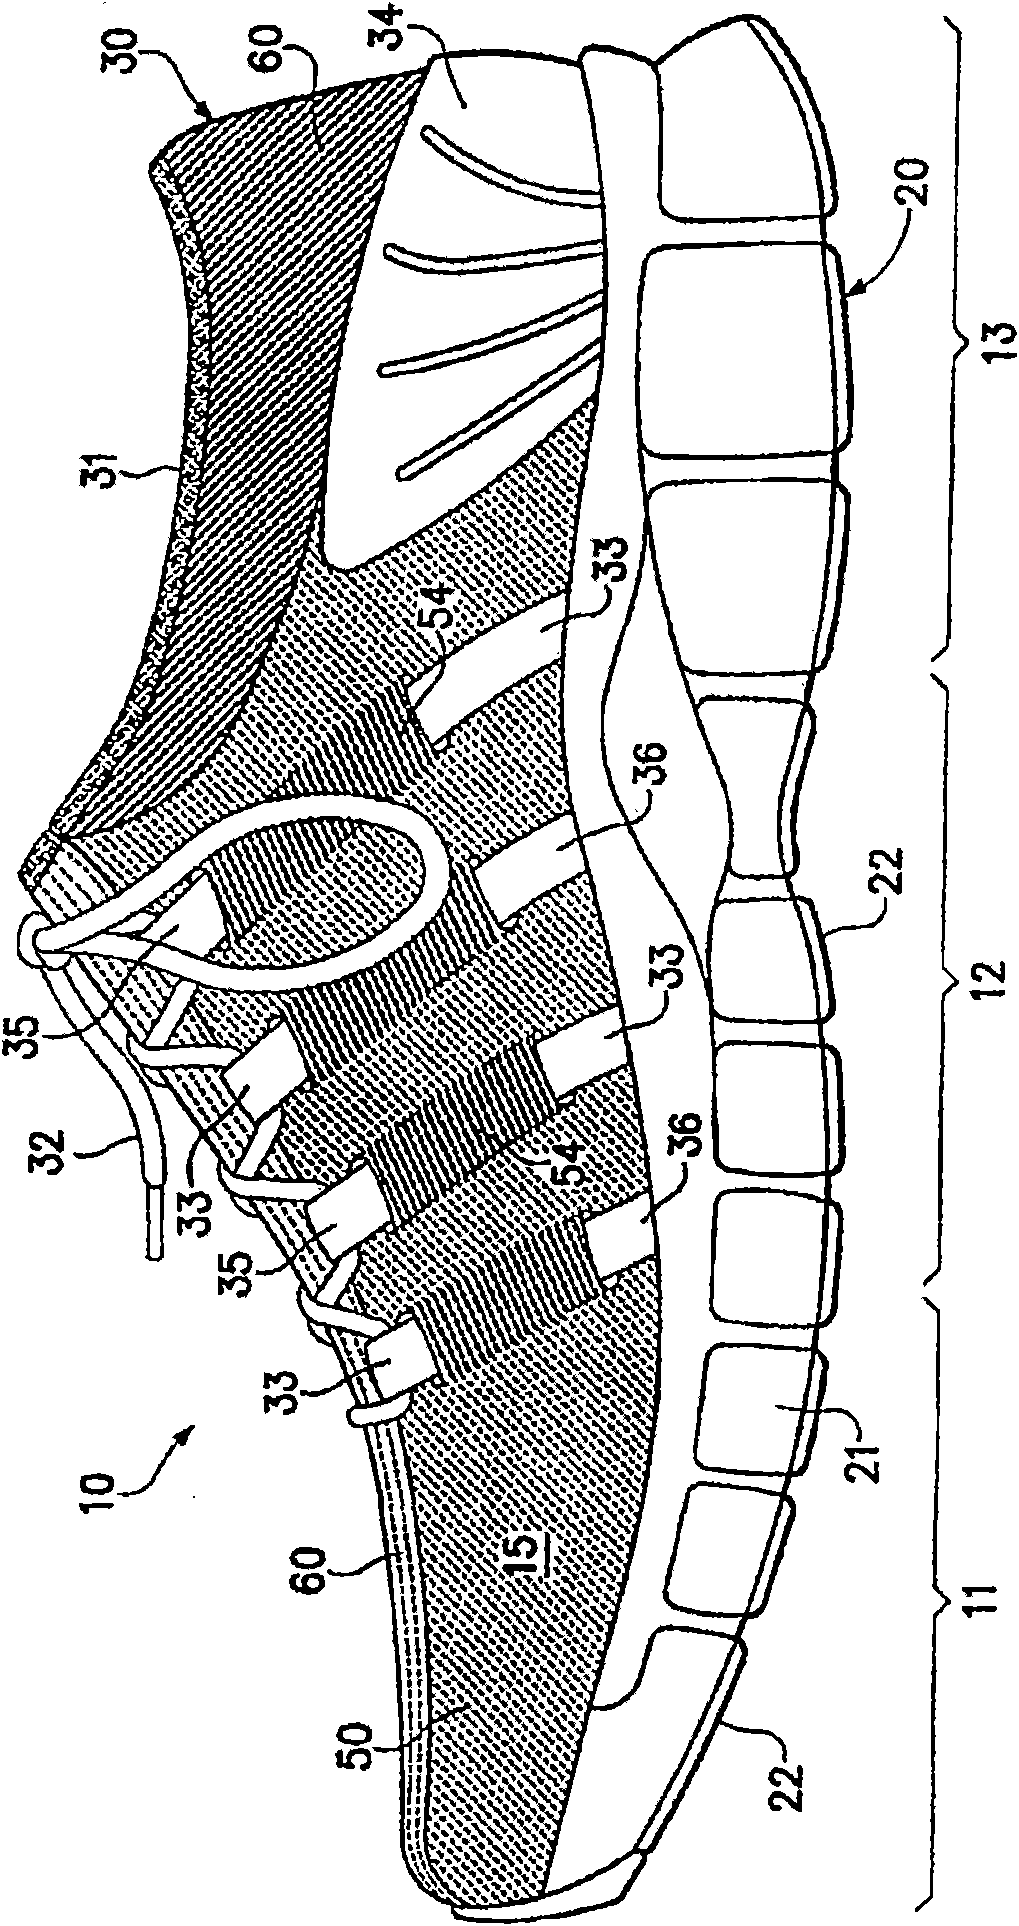 Article of footwear having a flat knit upper construction or other upper construction